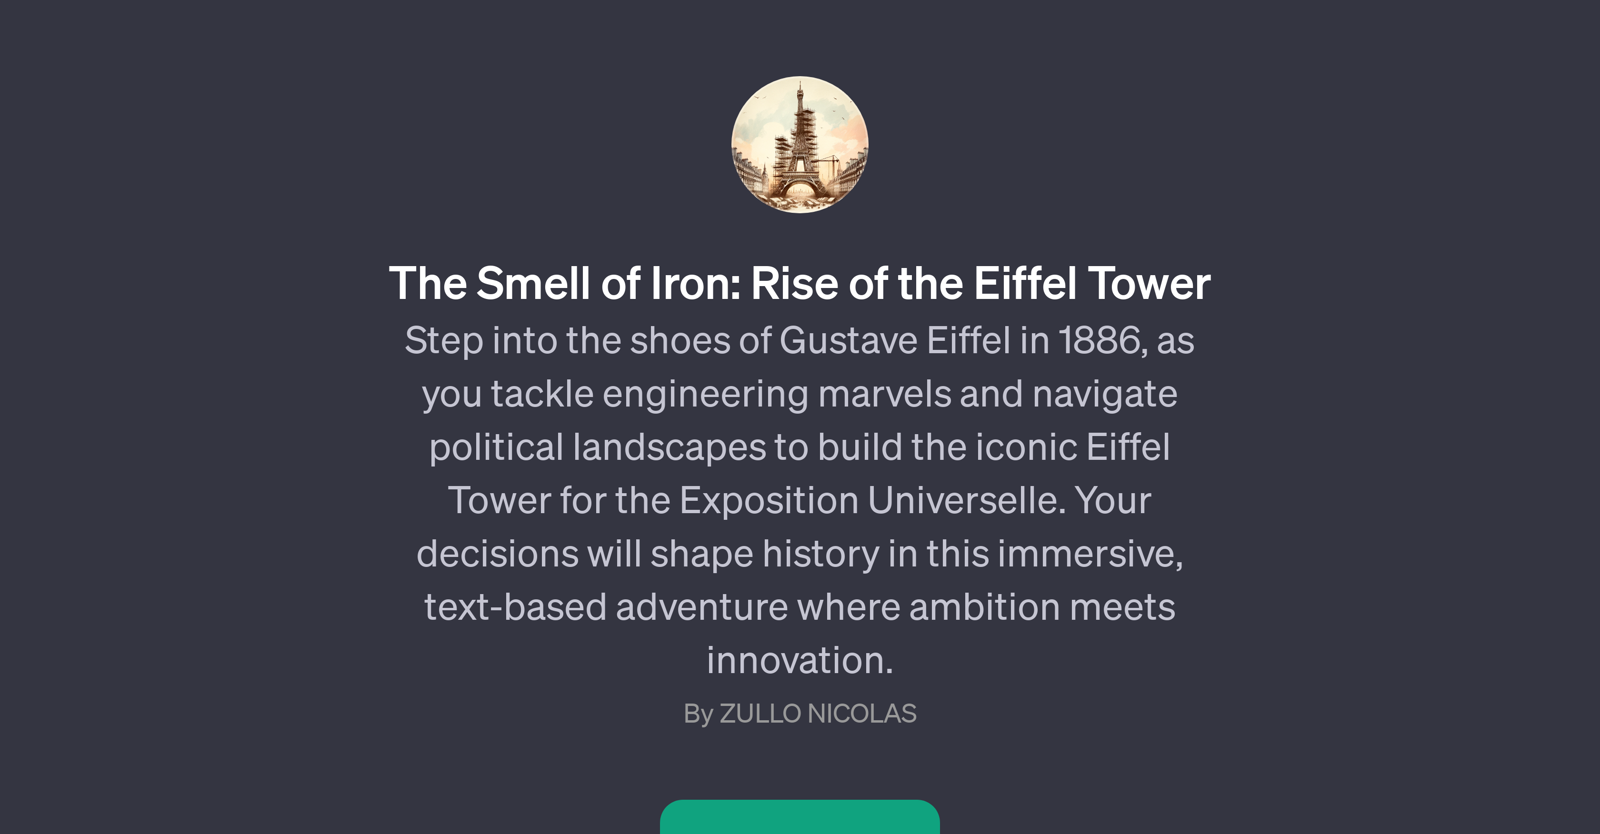 The Smell of Iron: Rise of the Eiffel Tower website